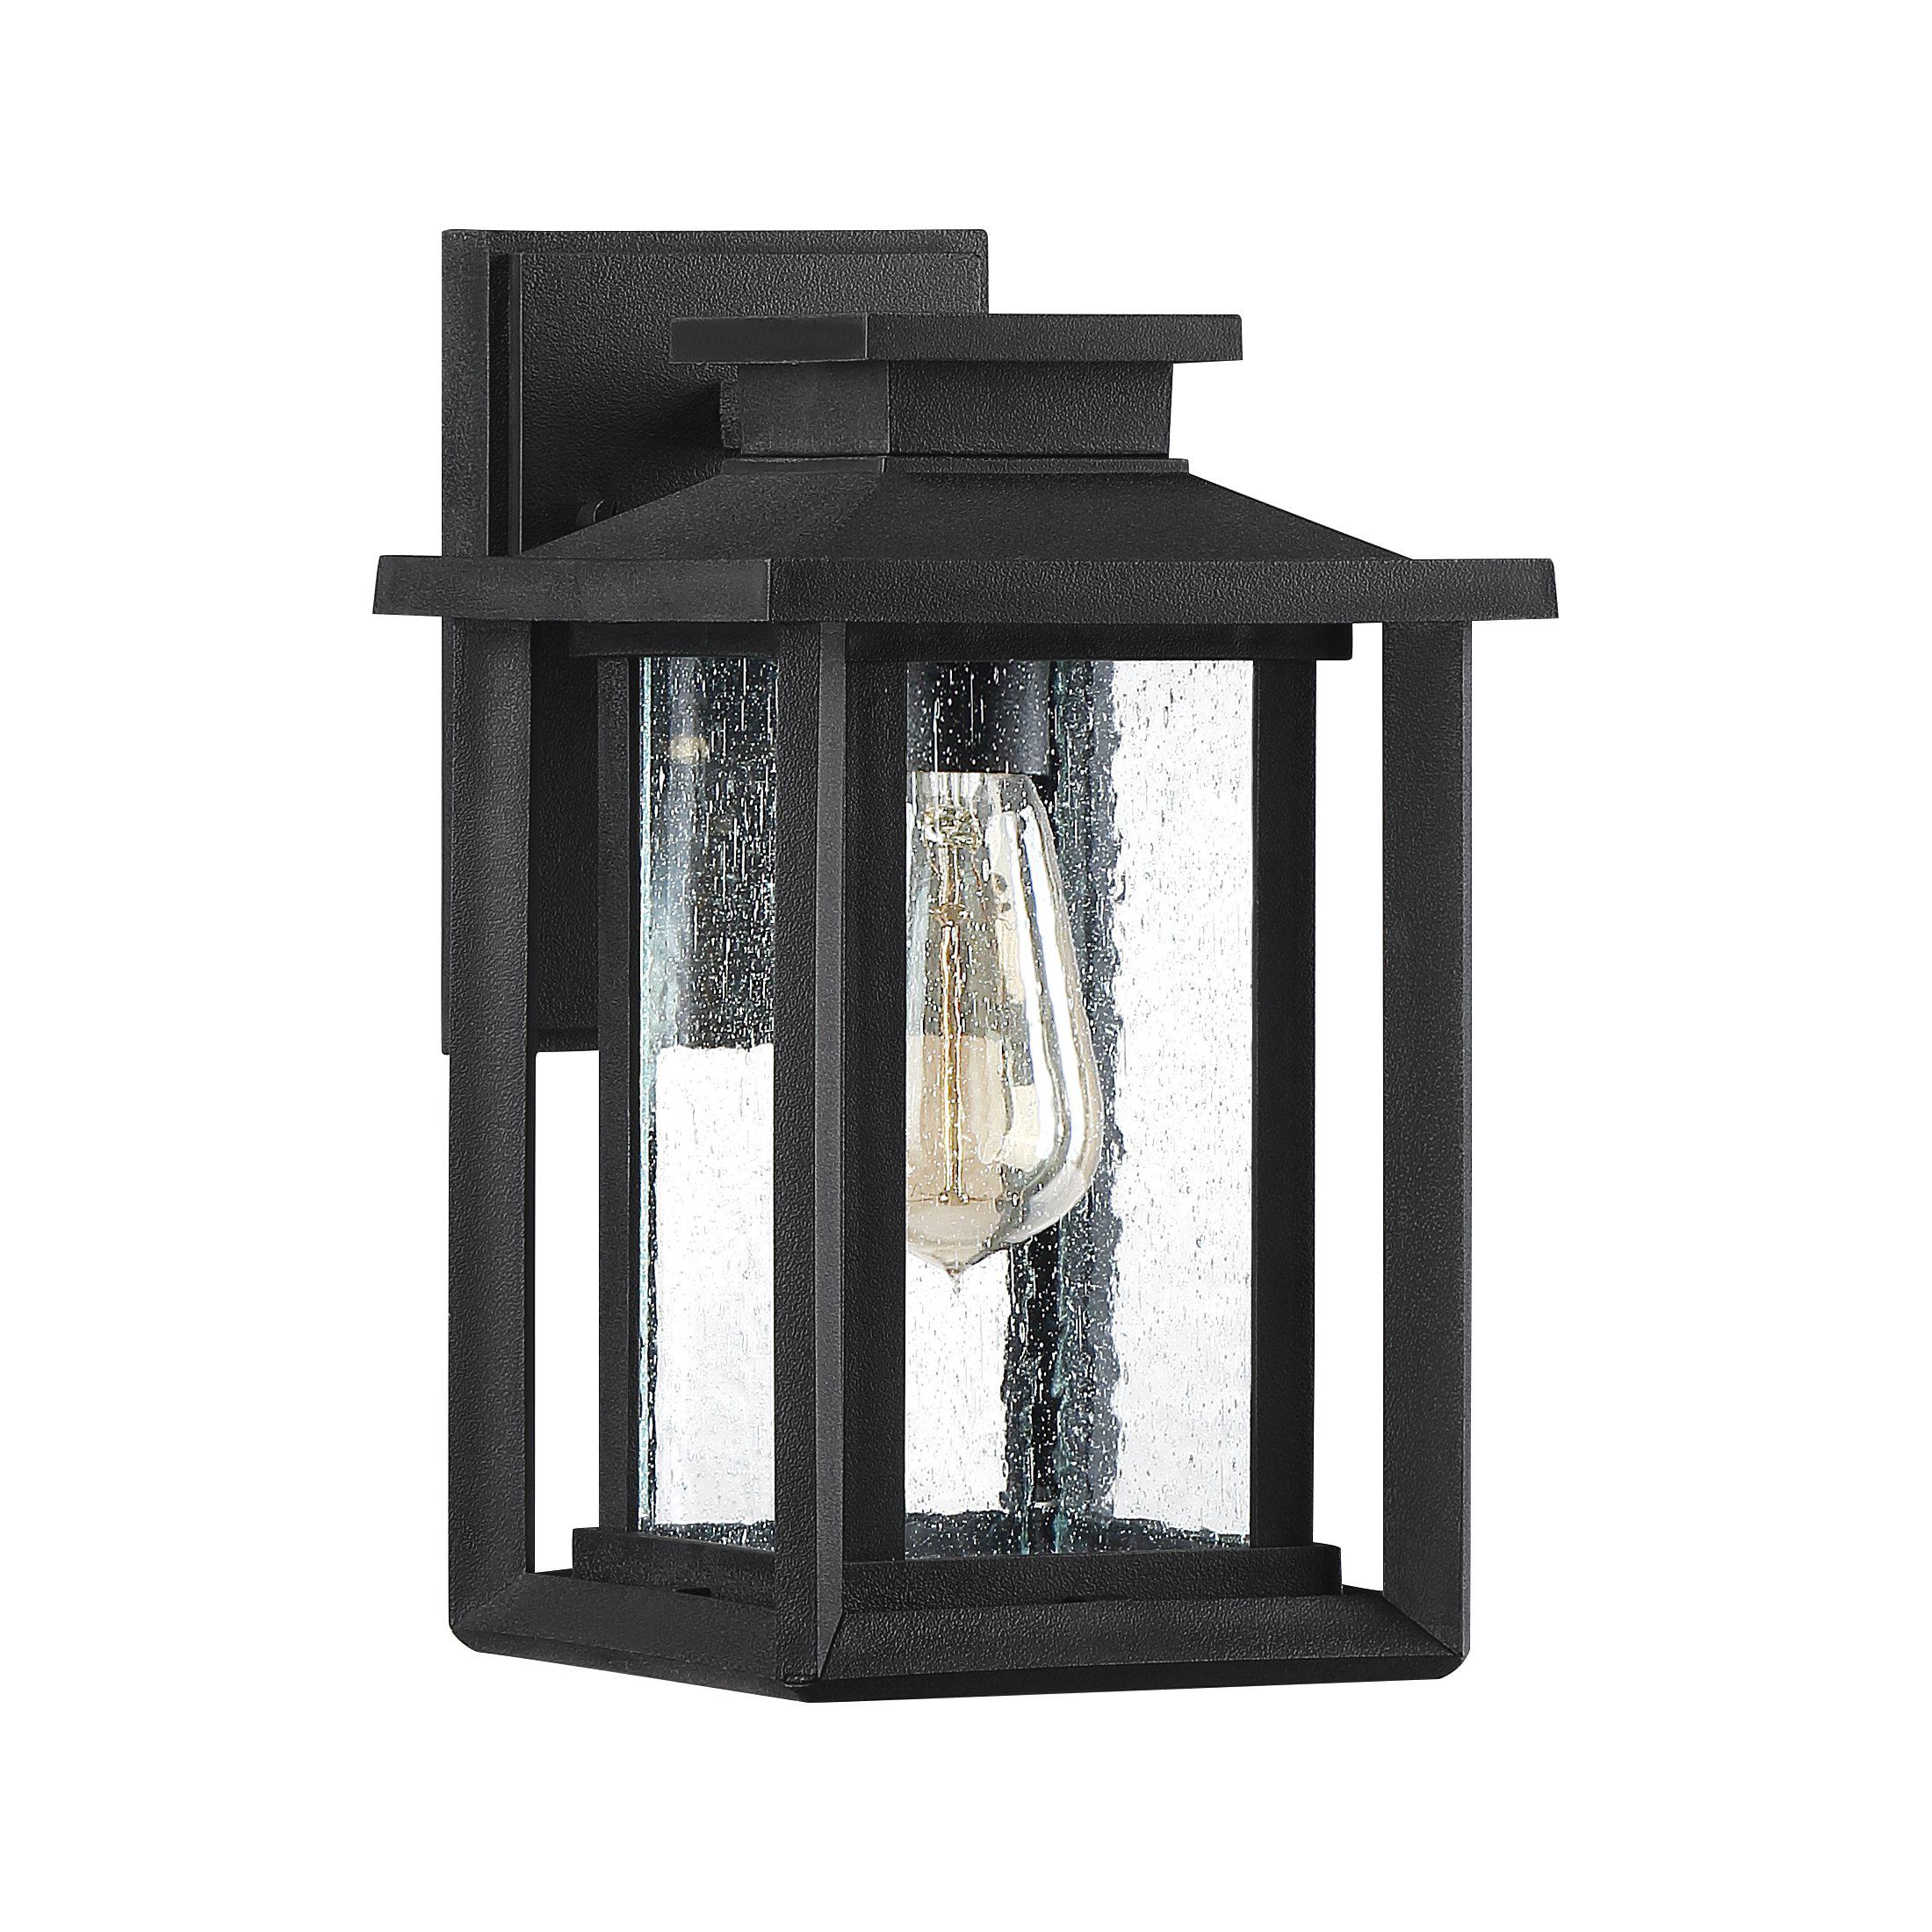 Quoizel Wakefield Outdoor Lantern, Small | Overstock